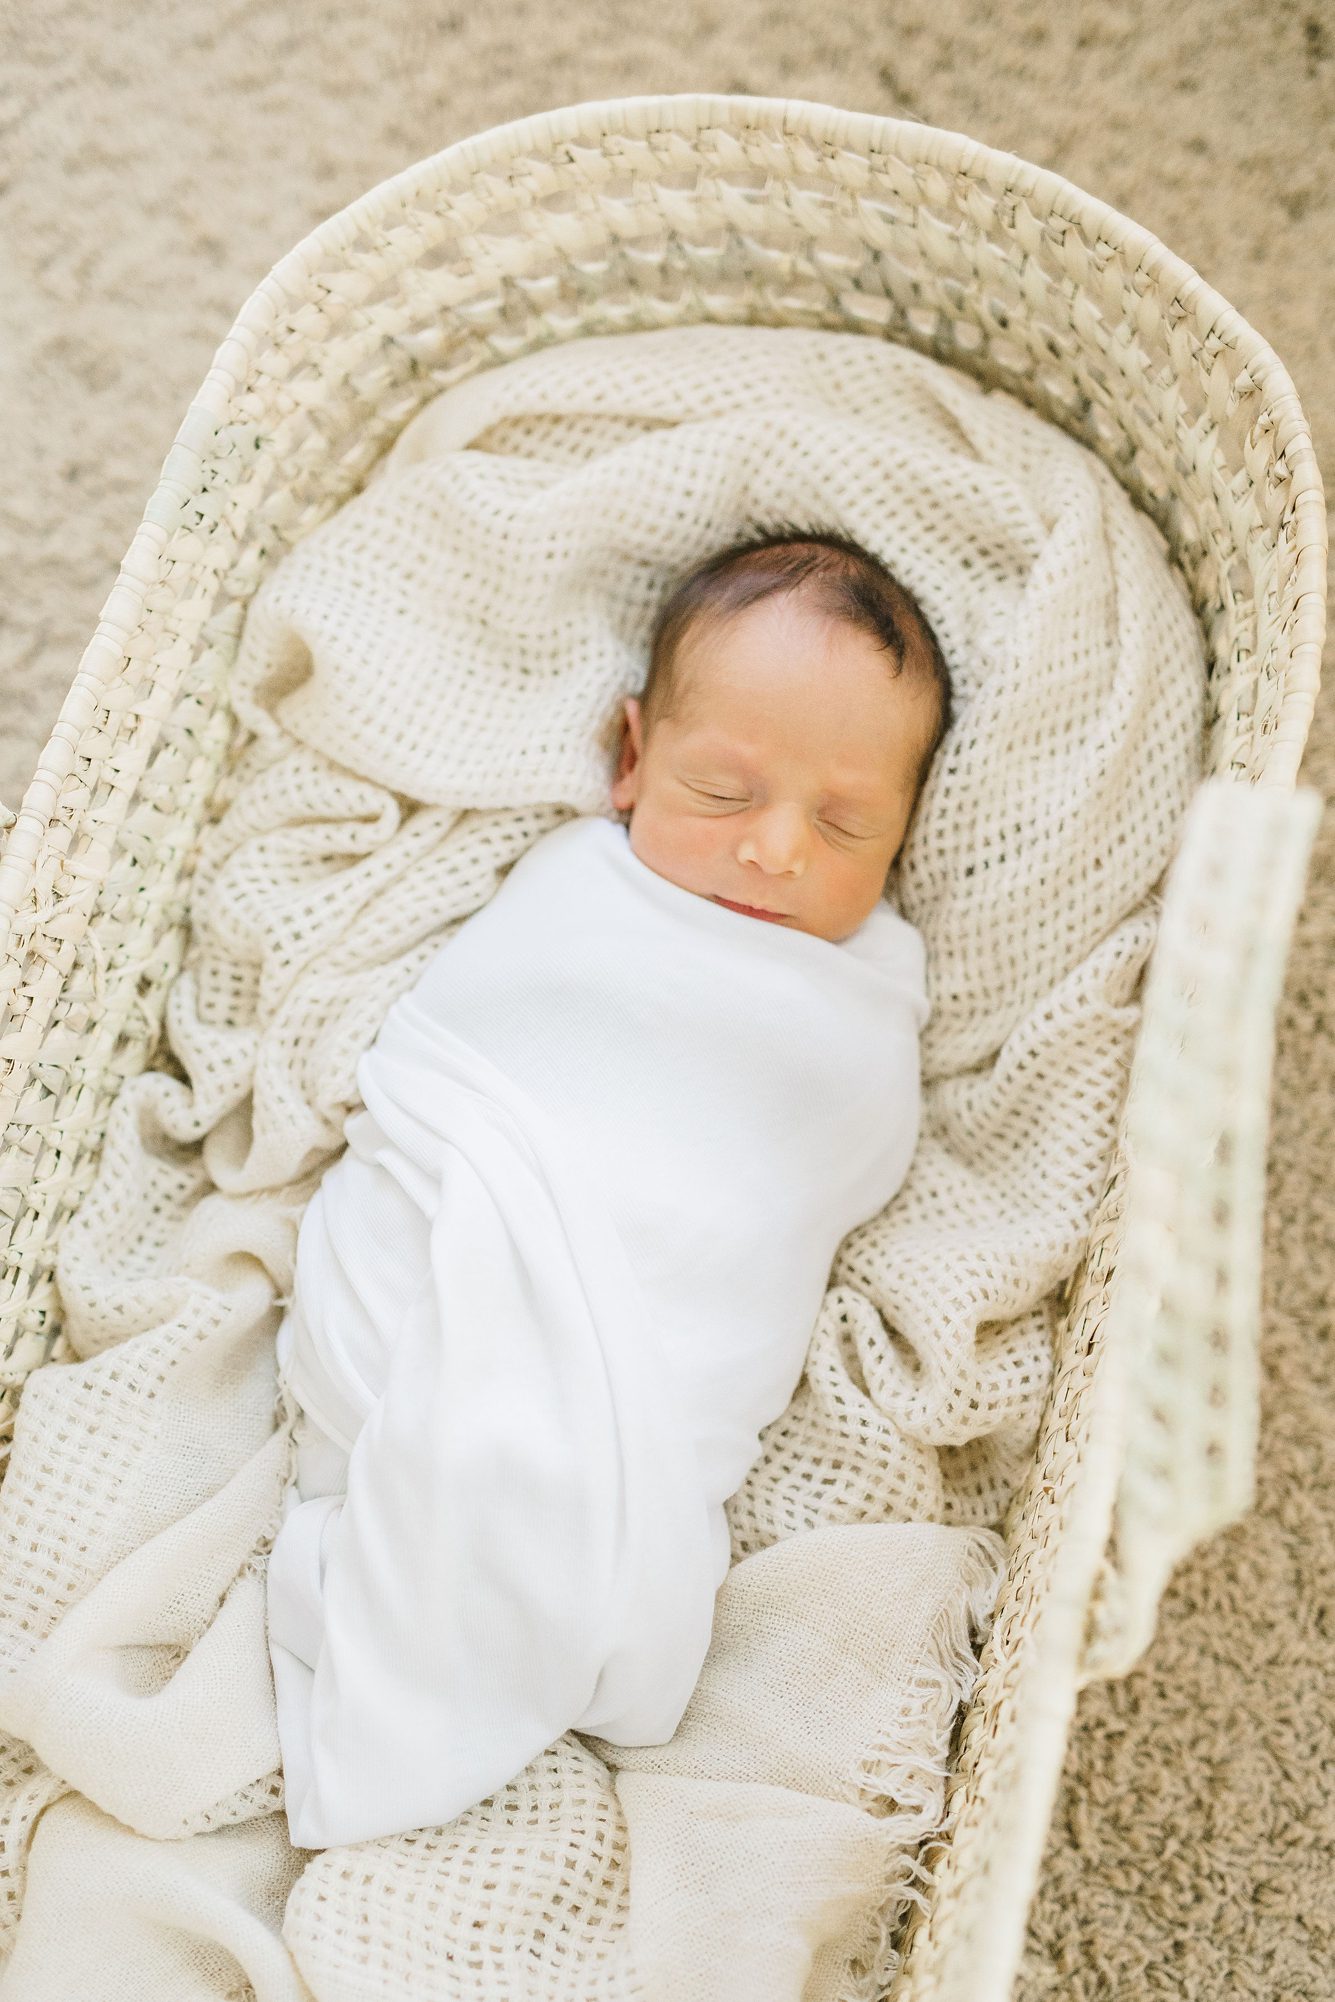 Baby in moses basket. Photo by LRG Portraits